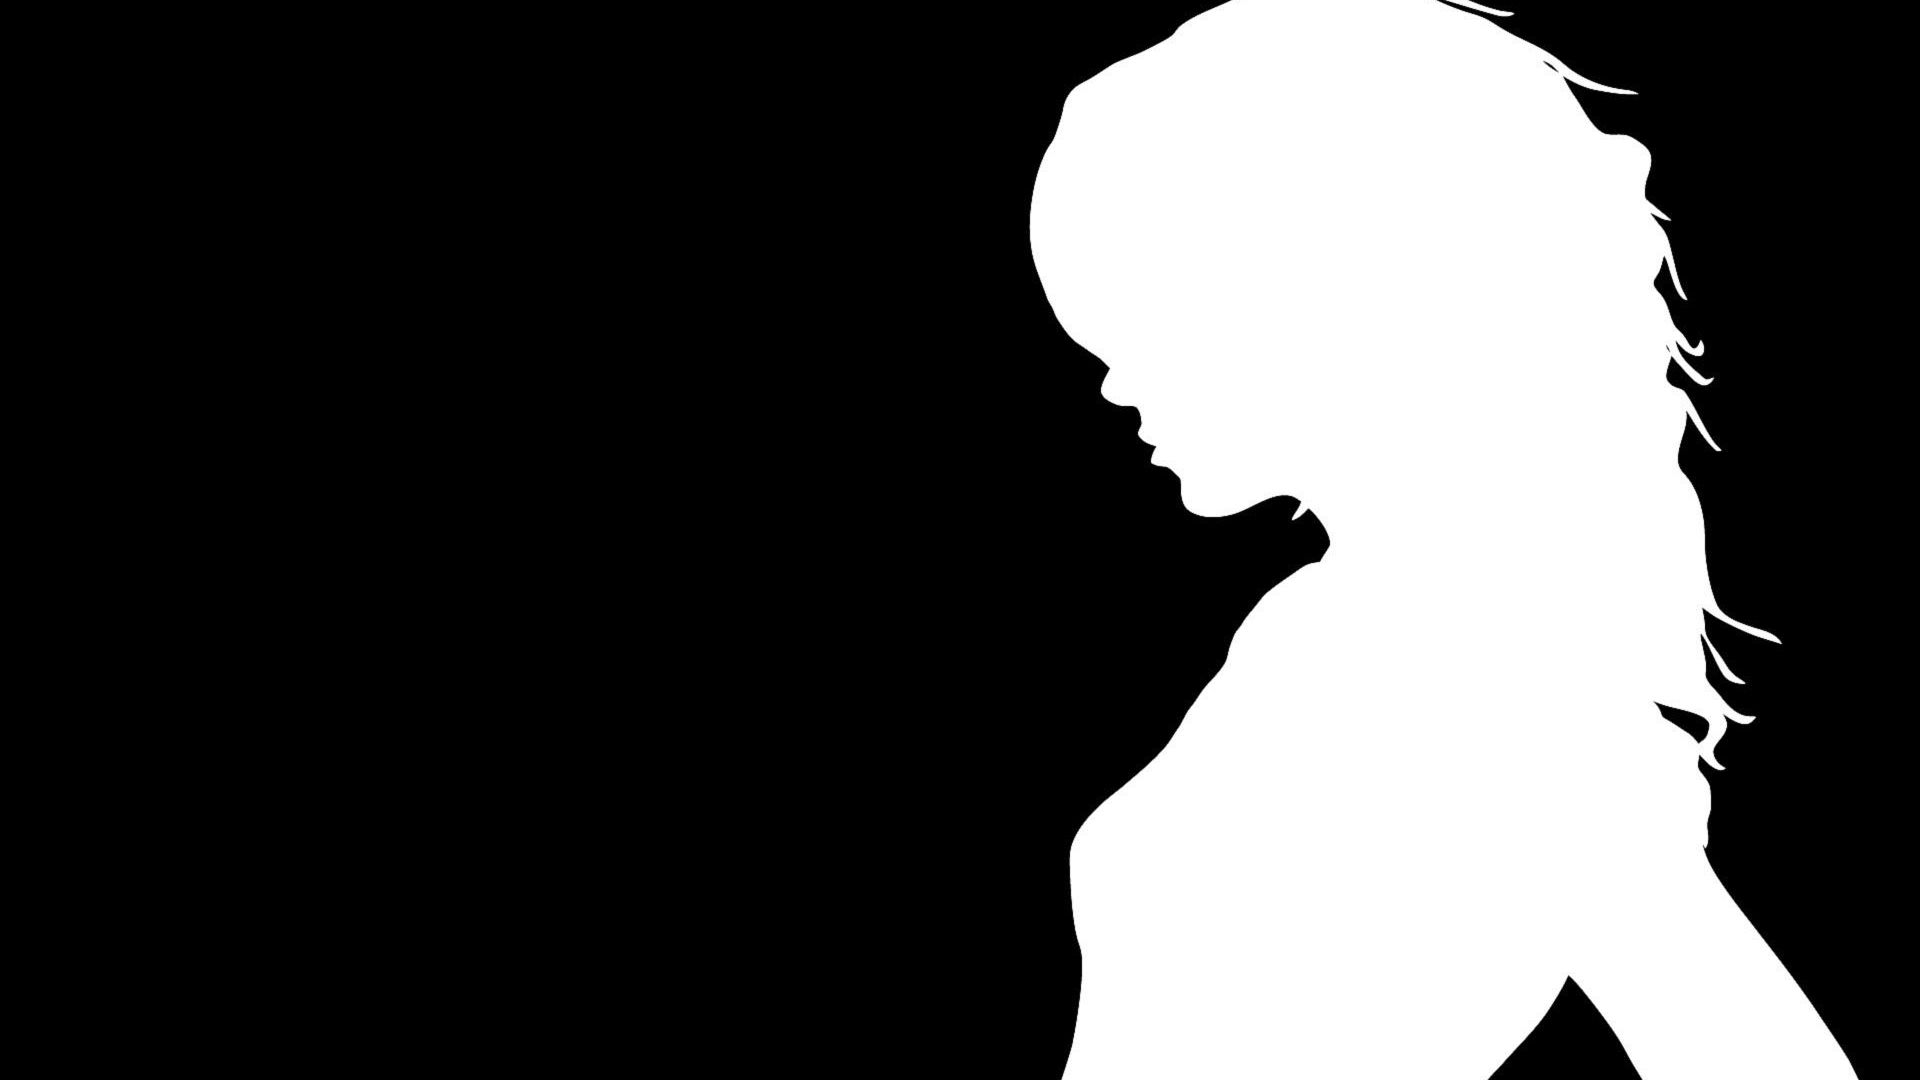 Download wallpaper 2048x1152 silhouettes, couple, love 